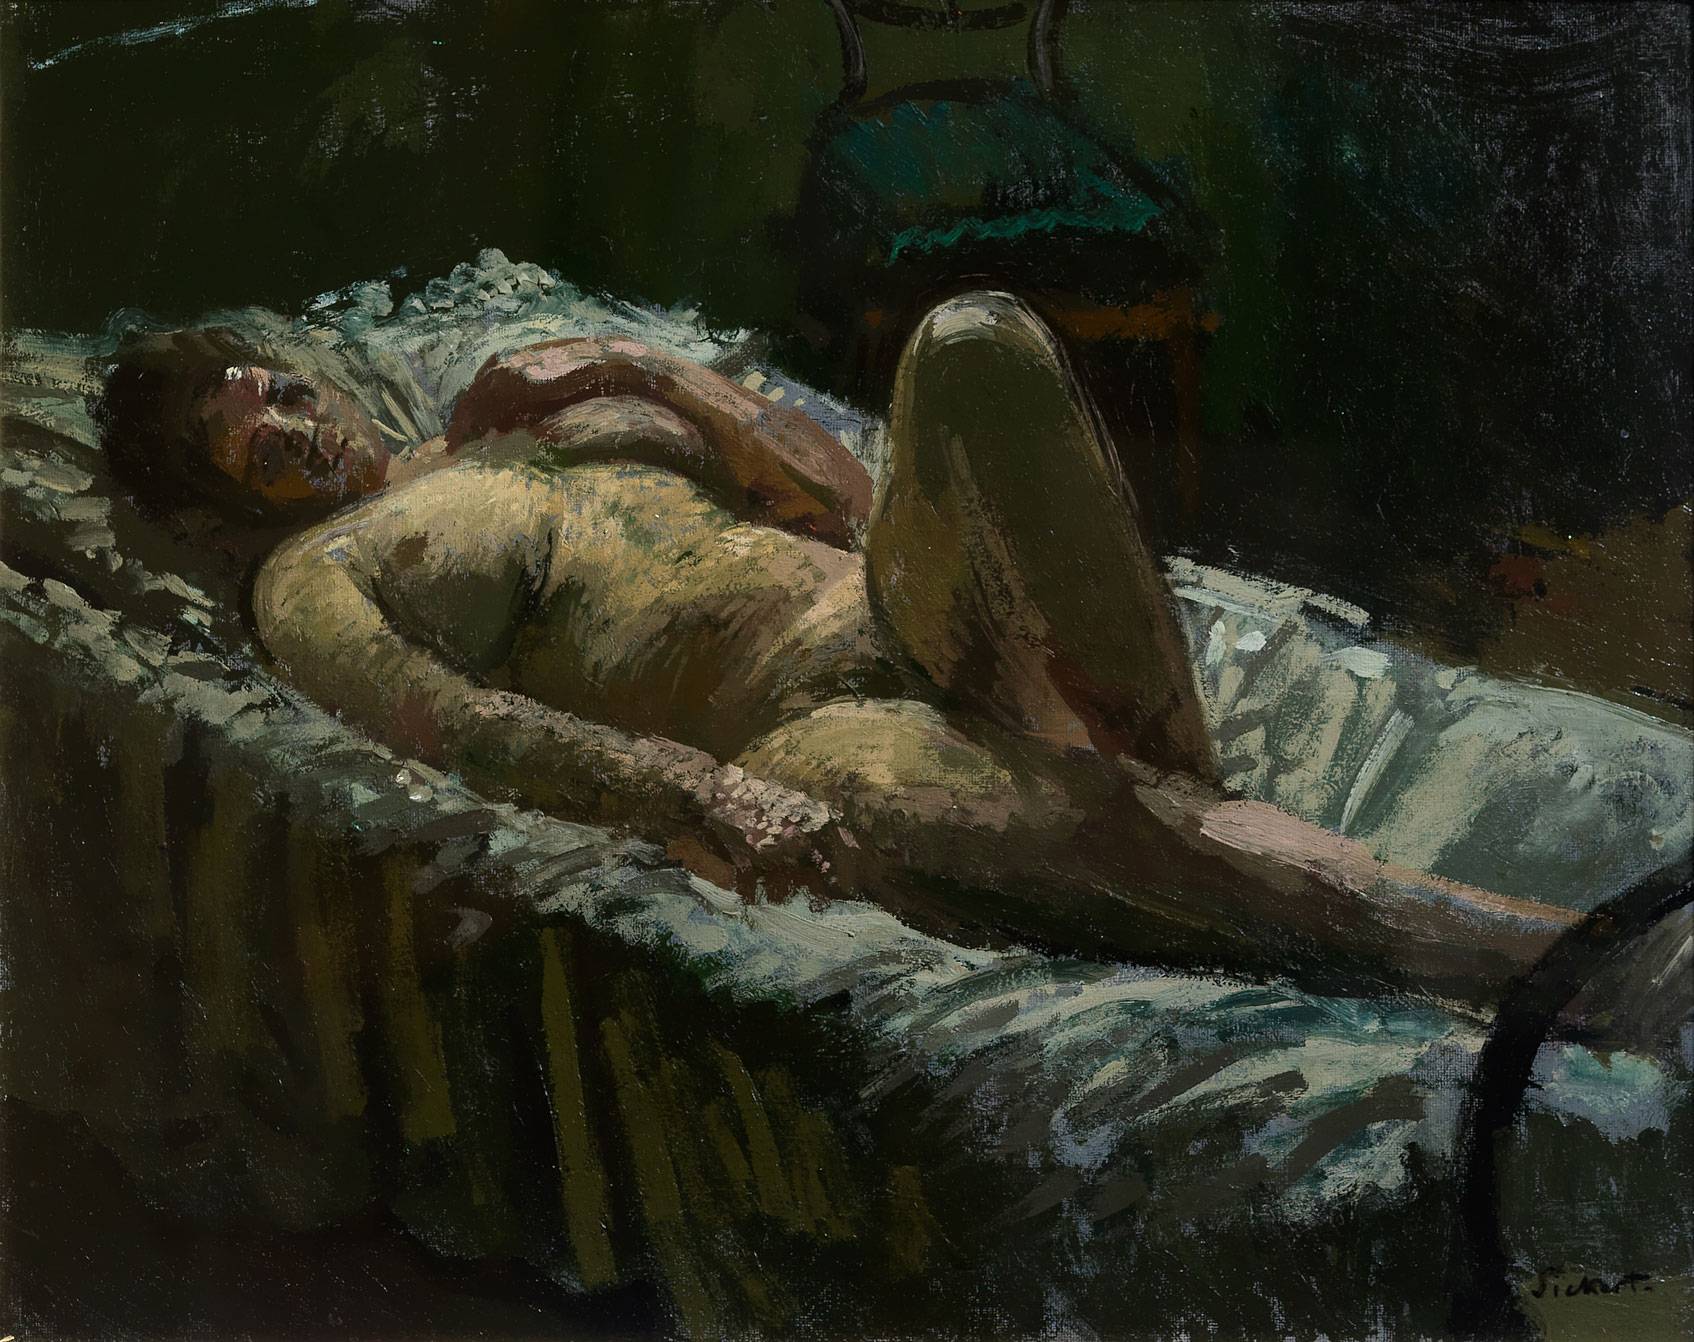 Walter Richard Sickert, "The Iron Bedstead" (vers 1906), huile sur toile, Collection particulière – Courtesy Hazlitt Holland-Hibbert. © Hazlitt Holland-Hibbert